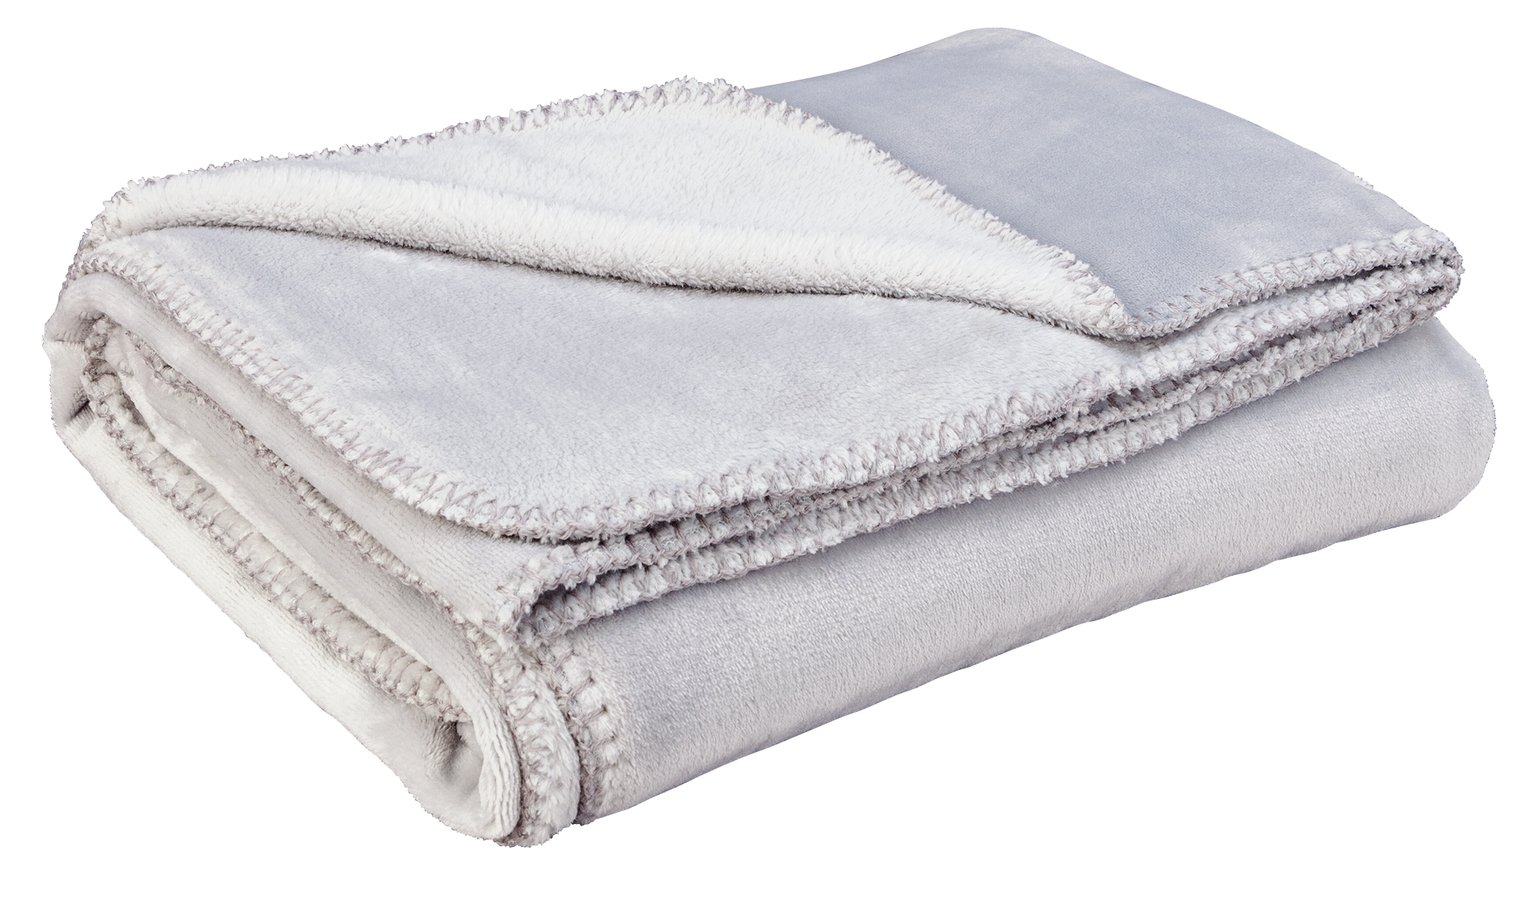 Argos Home Supersoft Large Throw - Dove Grey